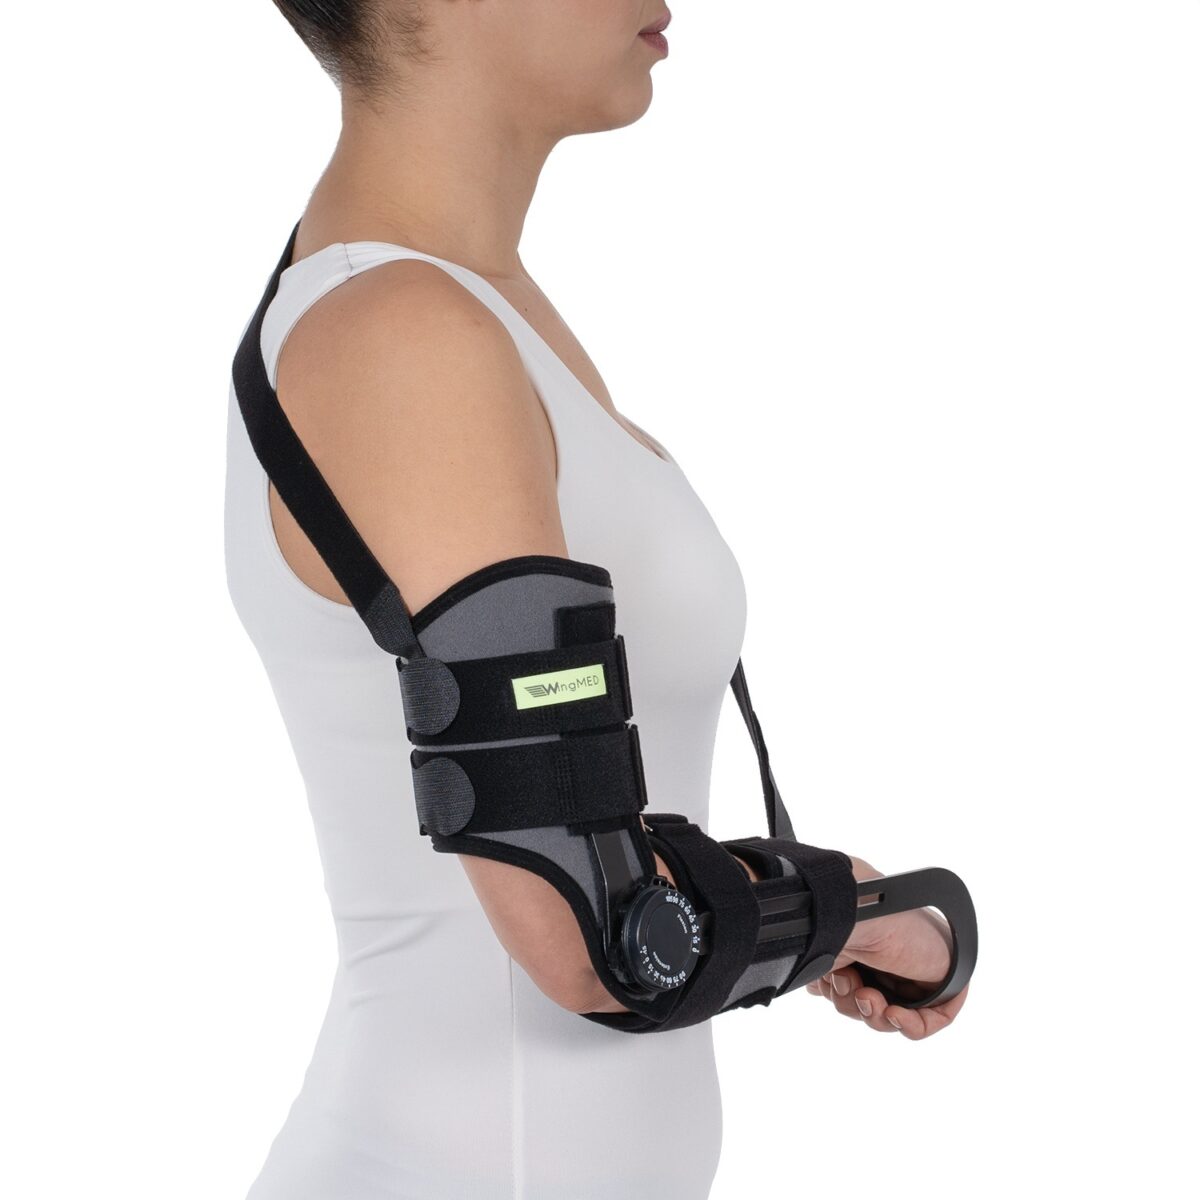 wingmed orthopedic equipments W218 adjustable elbow contracture splint with hand support 94